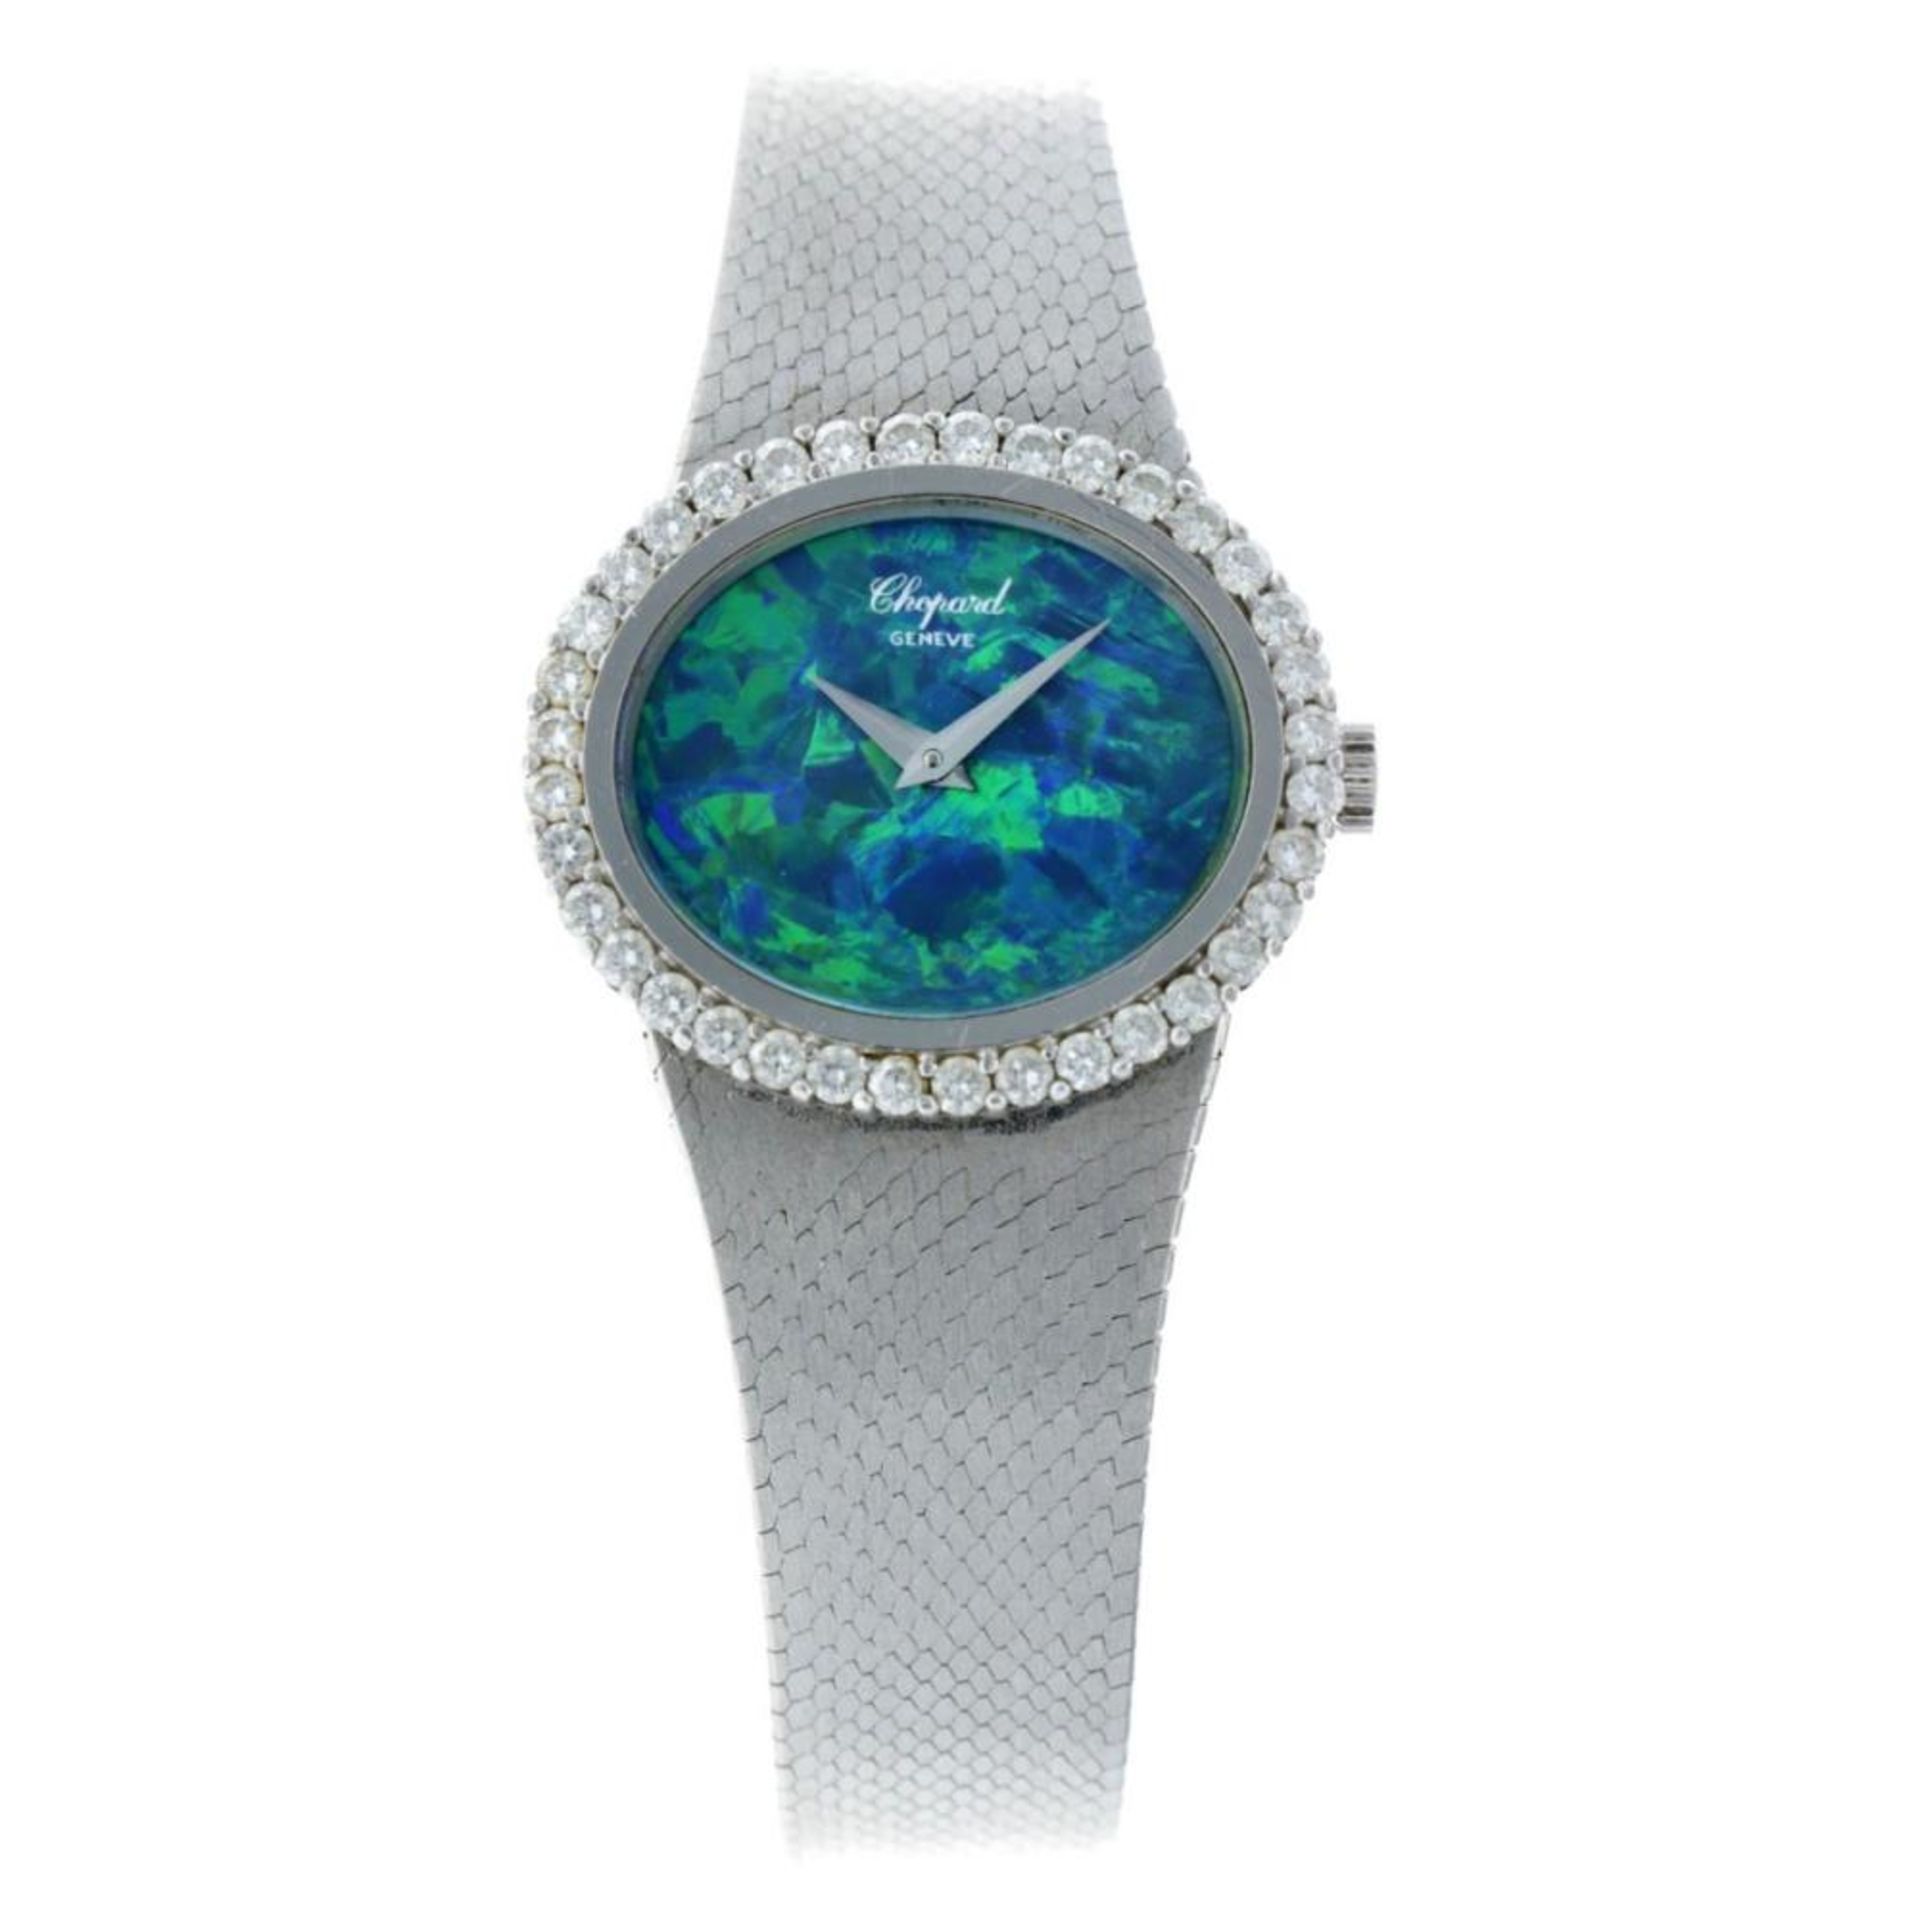 Chopard 5036 1 - Opal dial Diamonds - Ladies watch - approx. 1975. - Image 2 of 12